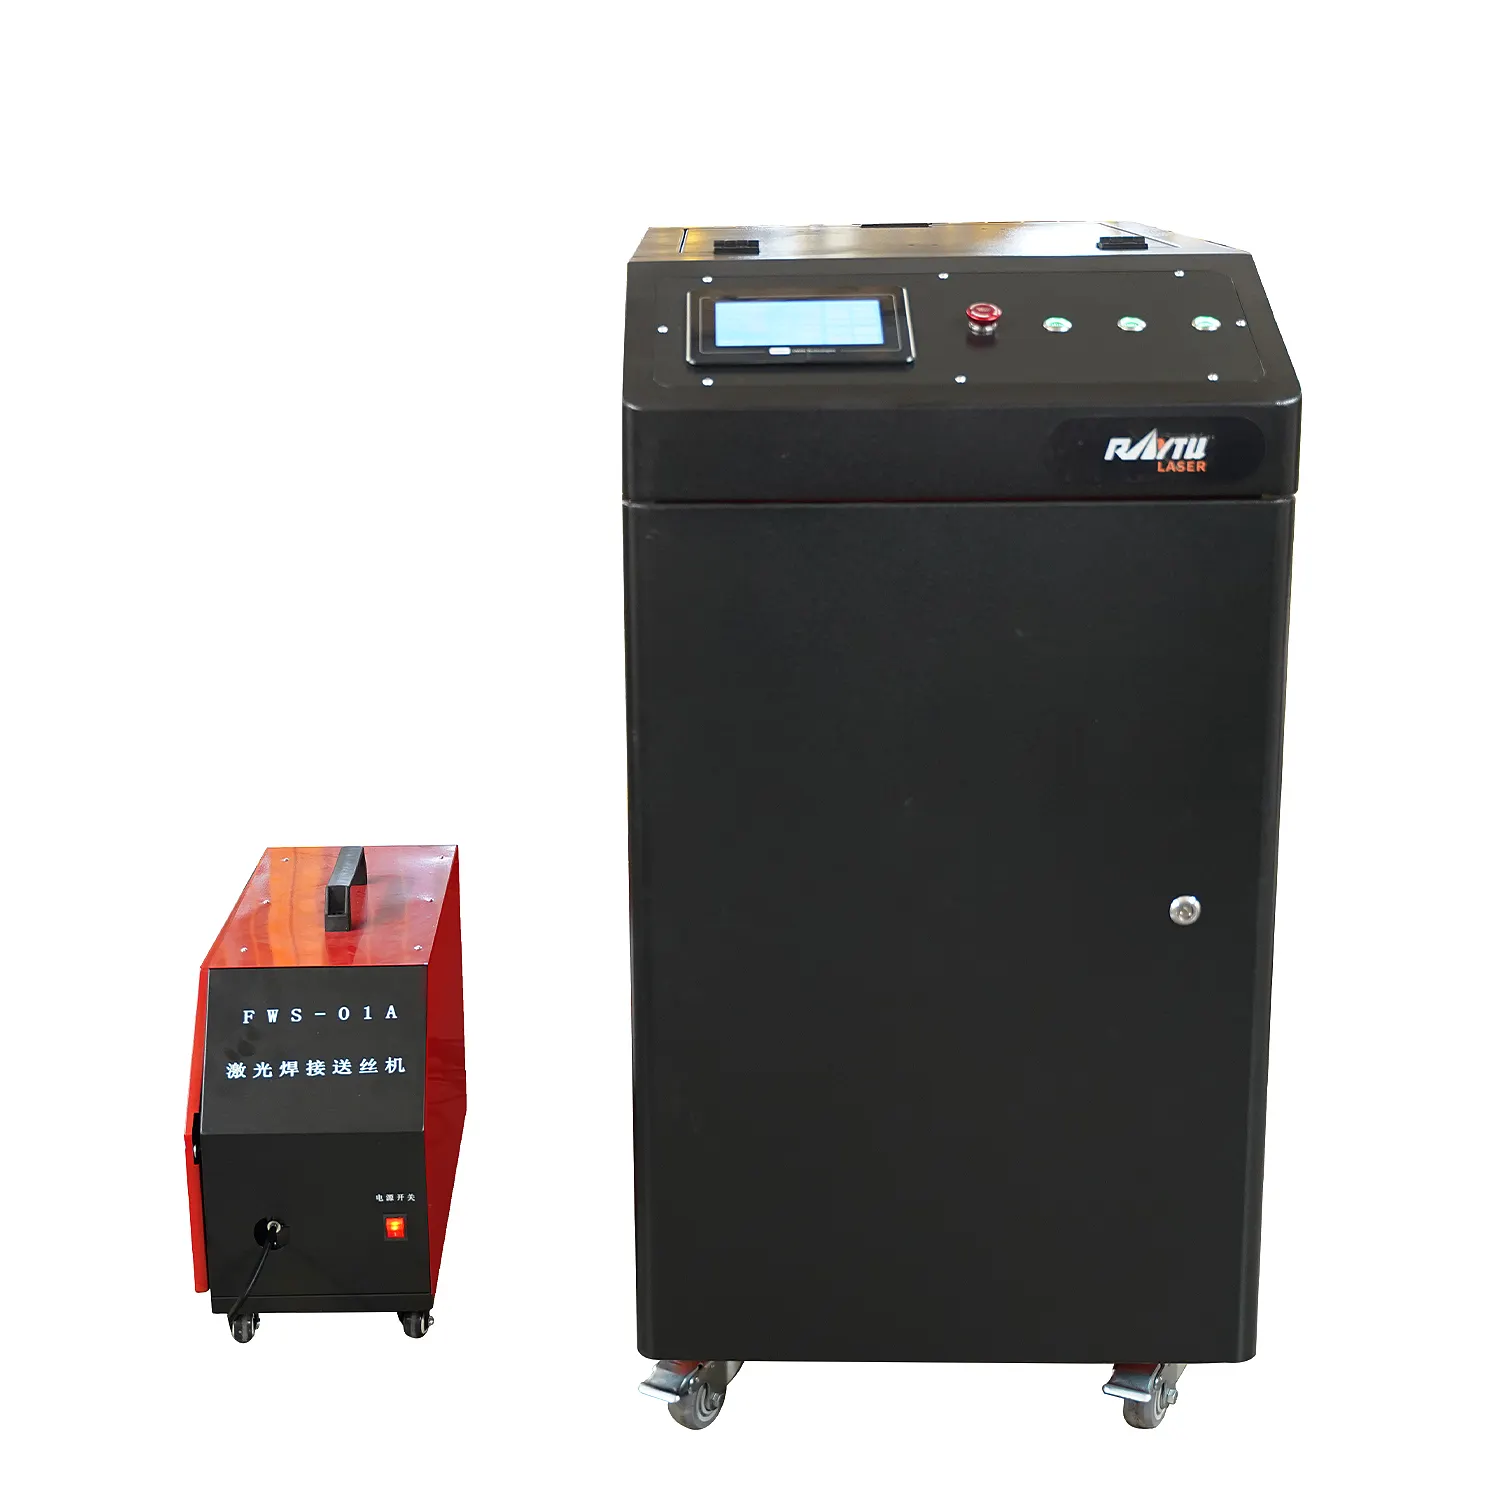 3 in 1 function laser machine - Laser welding, laser cutting, and laser cleaning.